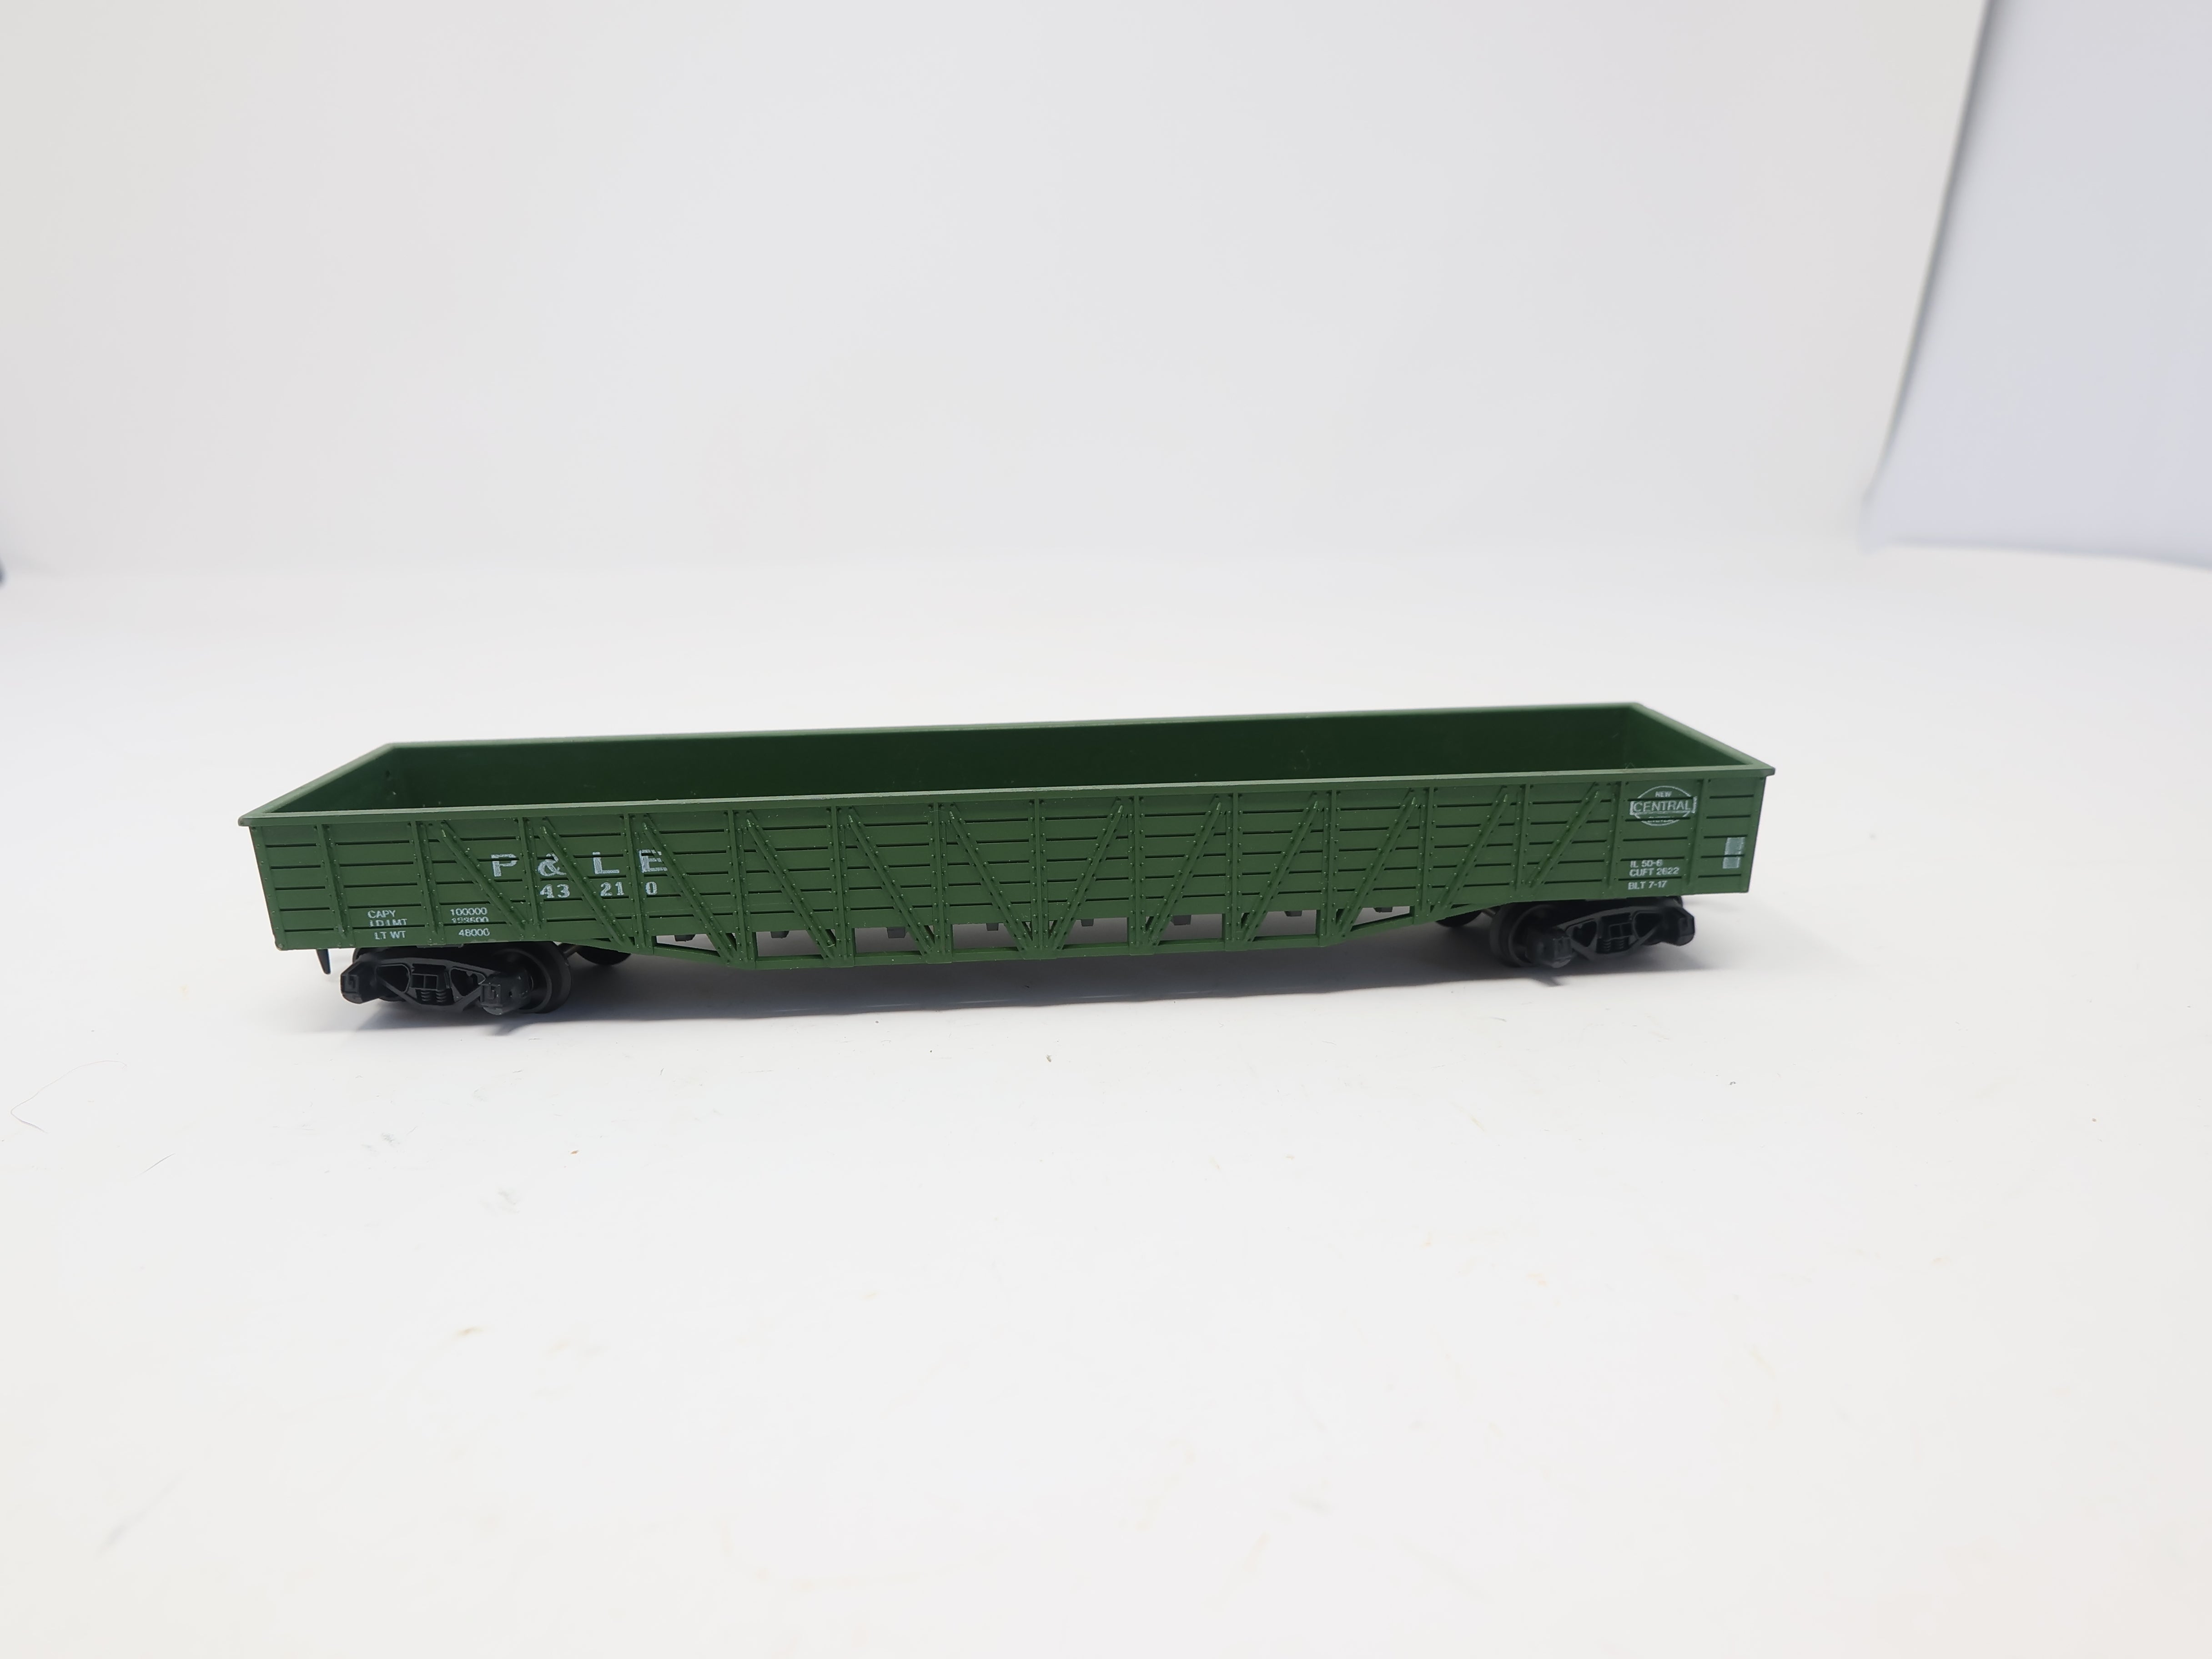 USED ROCO HO Scale, 50' Wood Sided Fishbelly Gondola, Pittsburgh and Lake Erie P&LE #43210